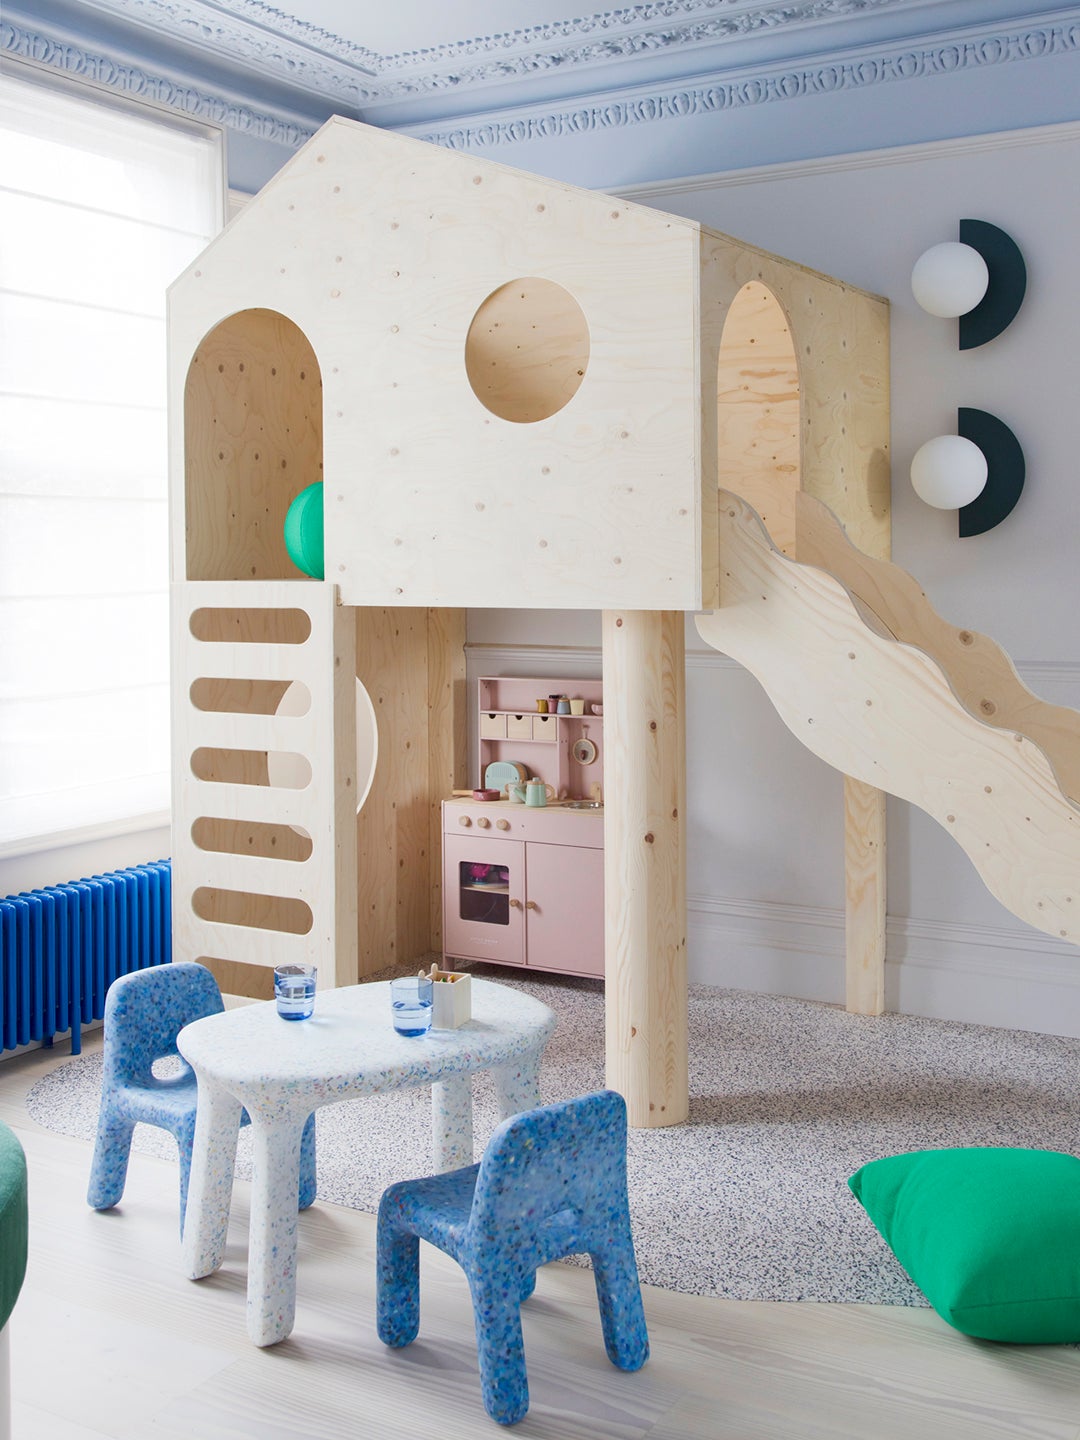 Birch wood play structure with slide in kids' playroom.